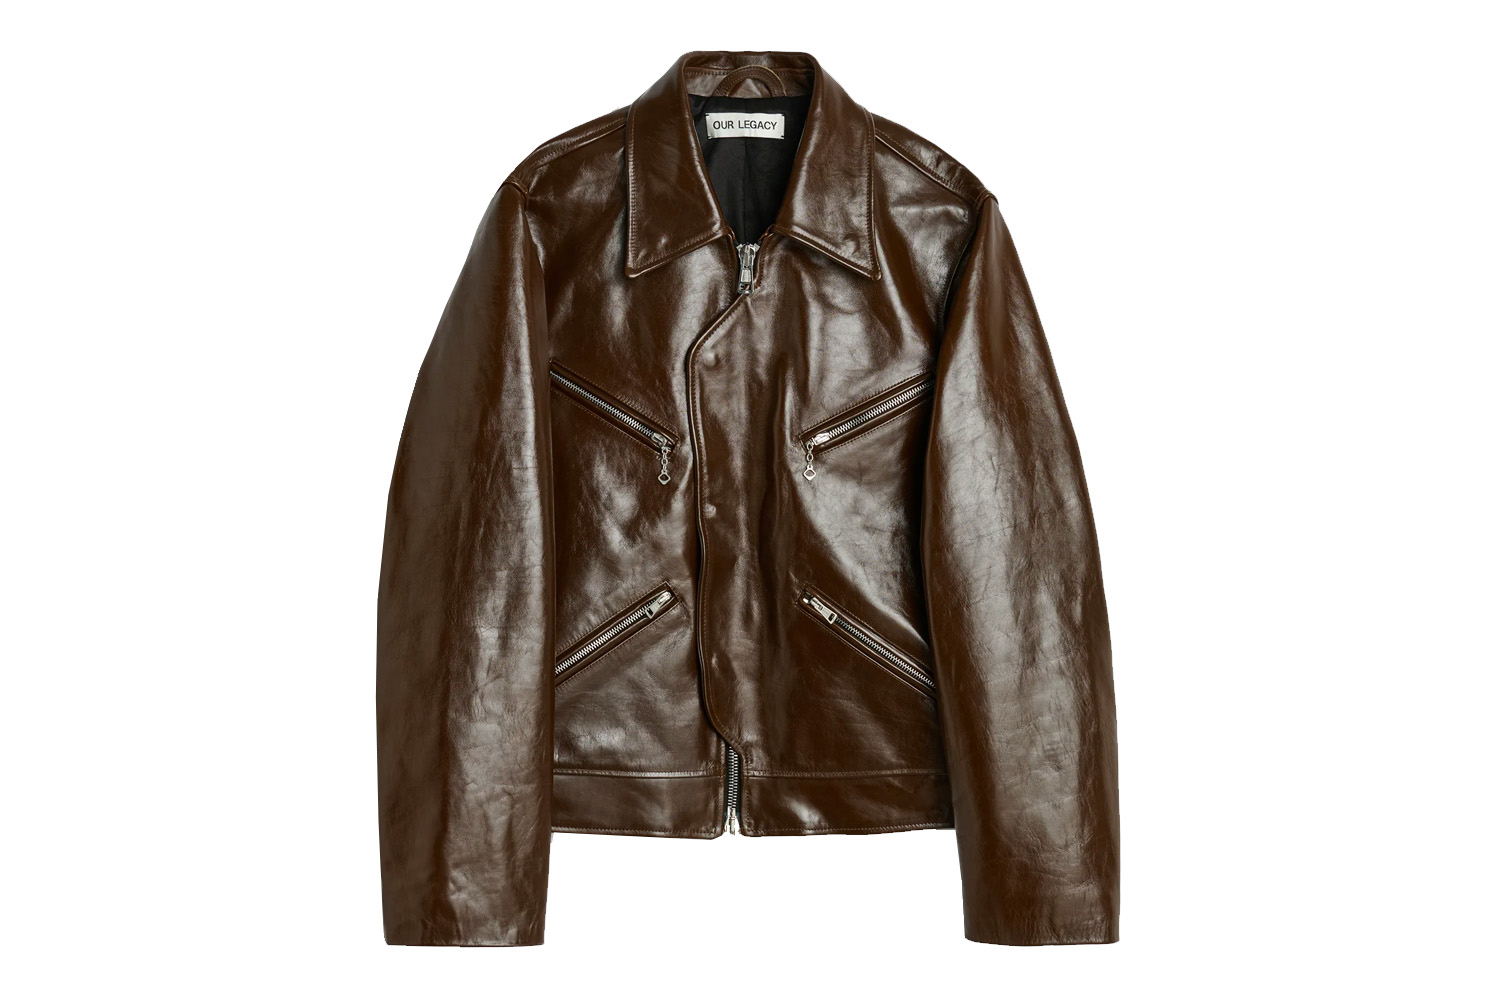 Our Legacy leather jacket